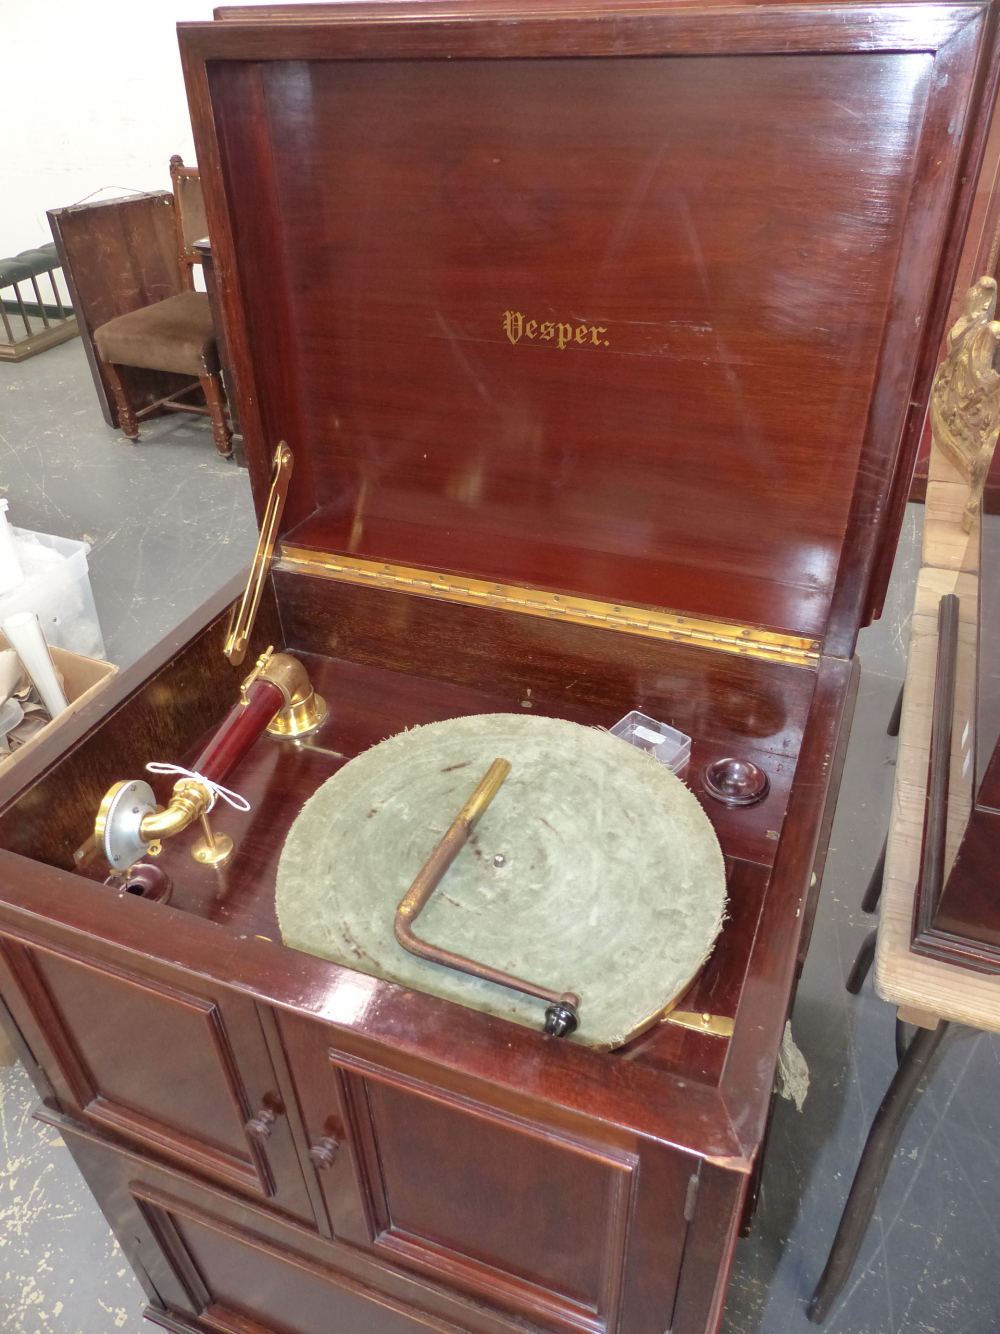 A MAHOGANY CASED VESPER WIND UP GRAMOPHONE, THE GILT MOUNTED MAHOGANY PLAYING ARM AND TURNTABLE - Image 2 of 9